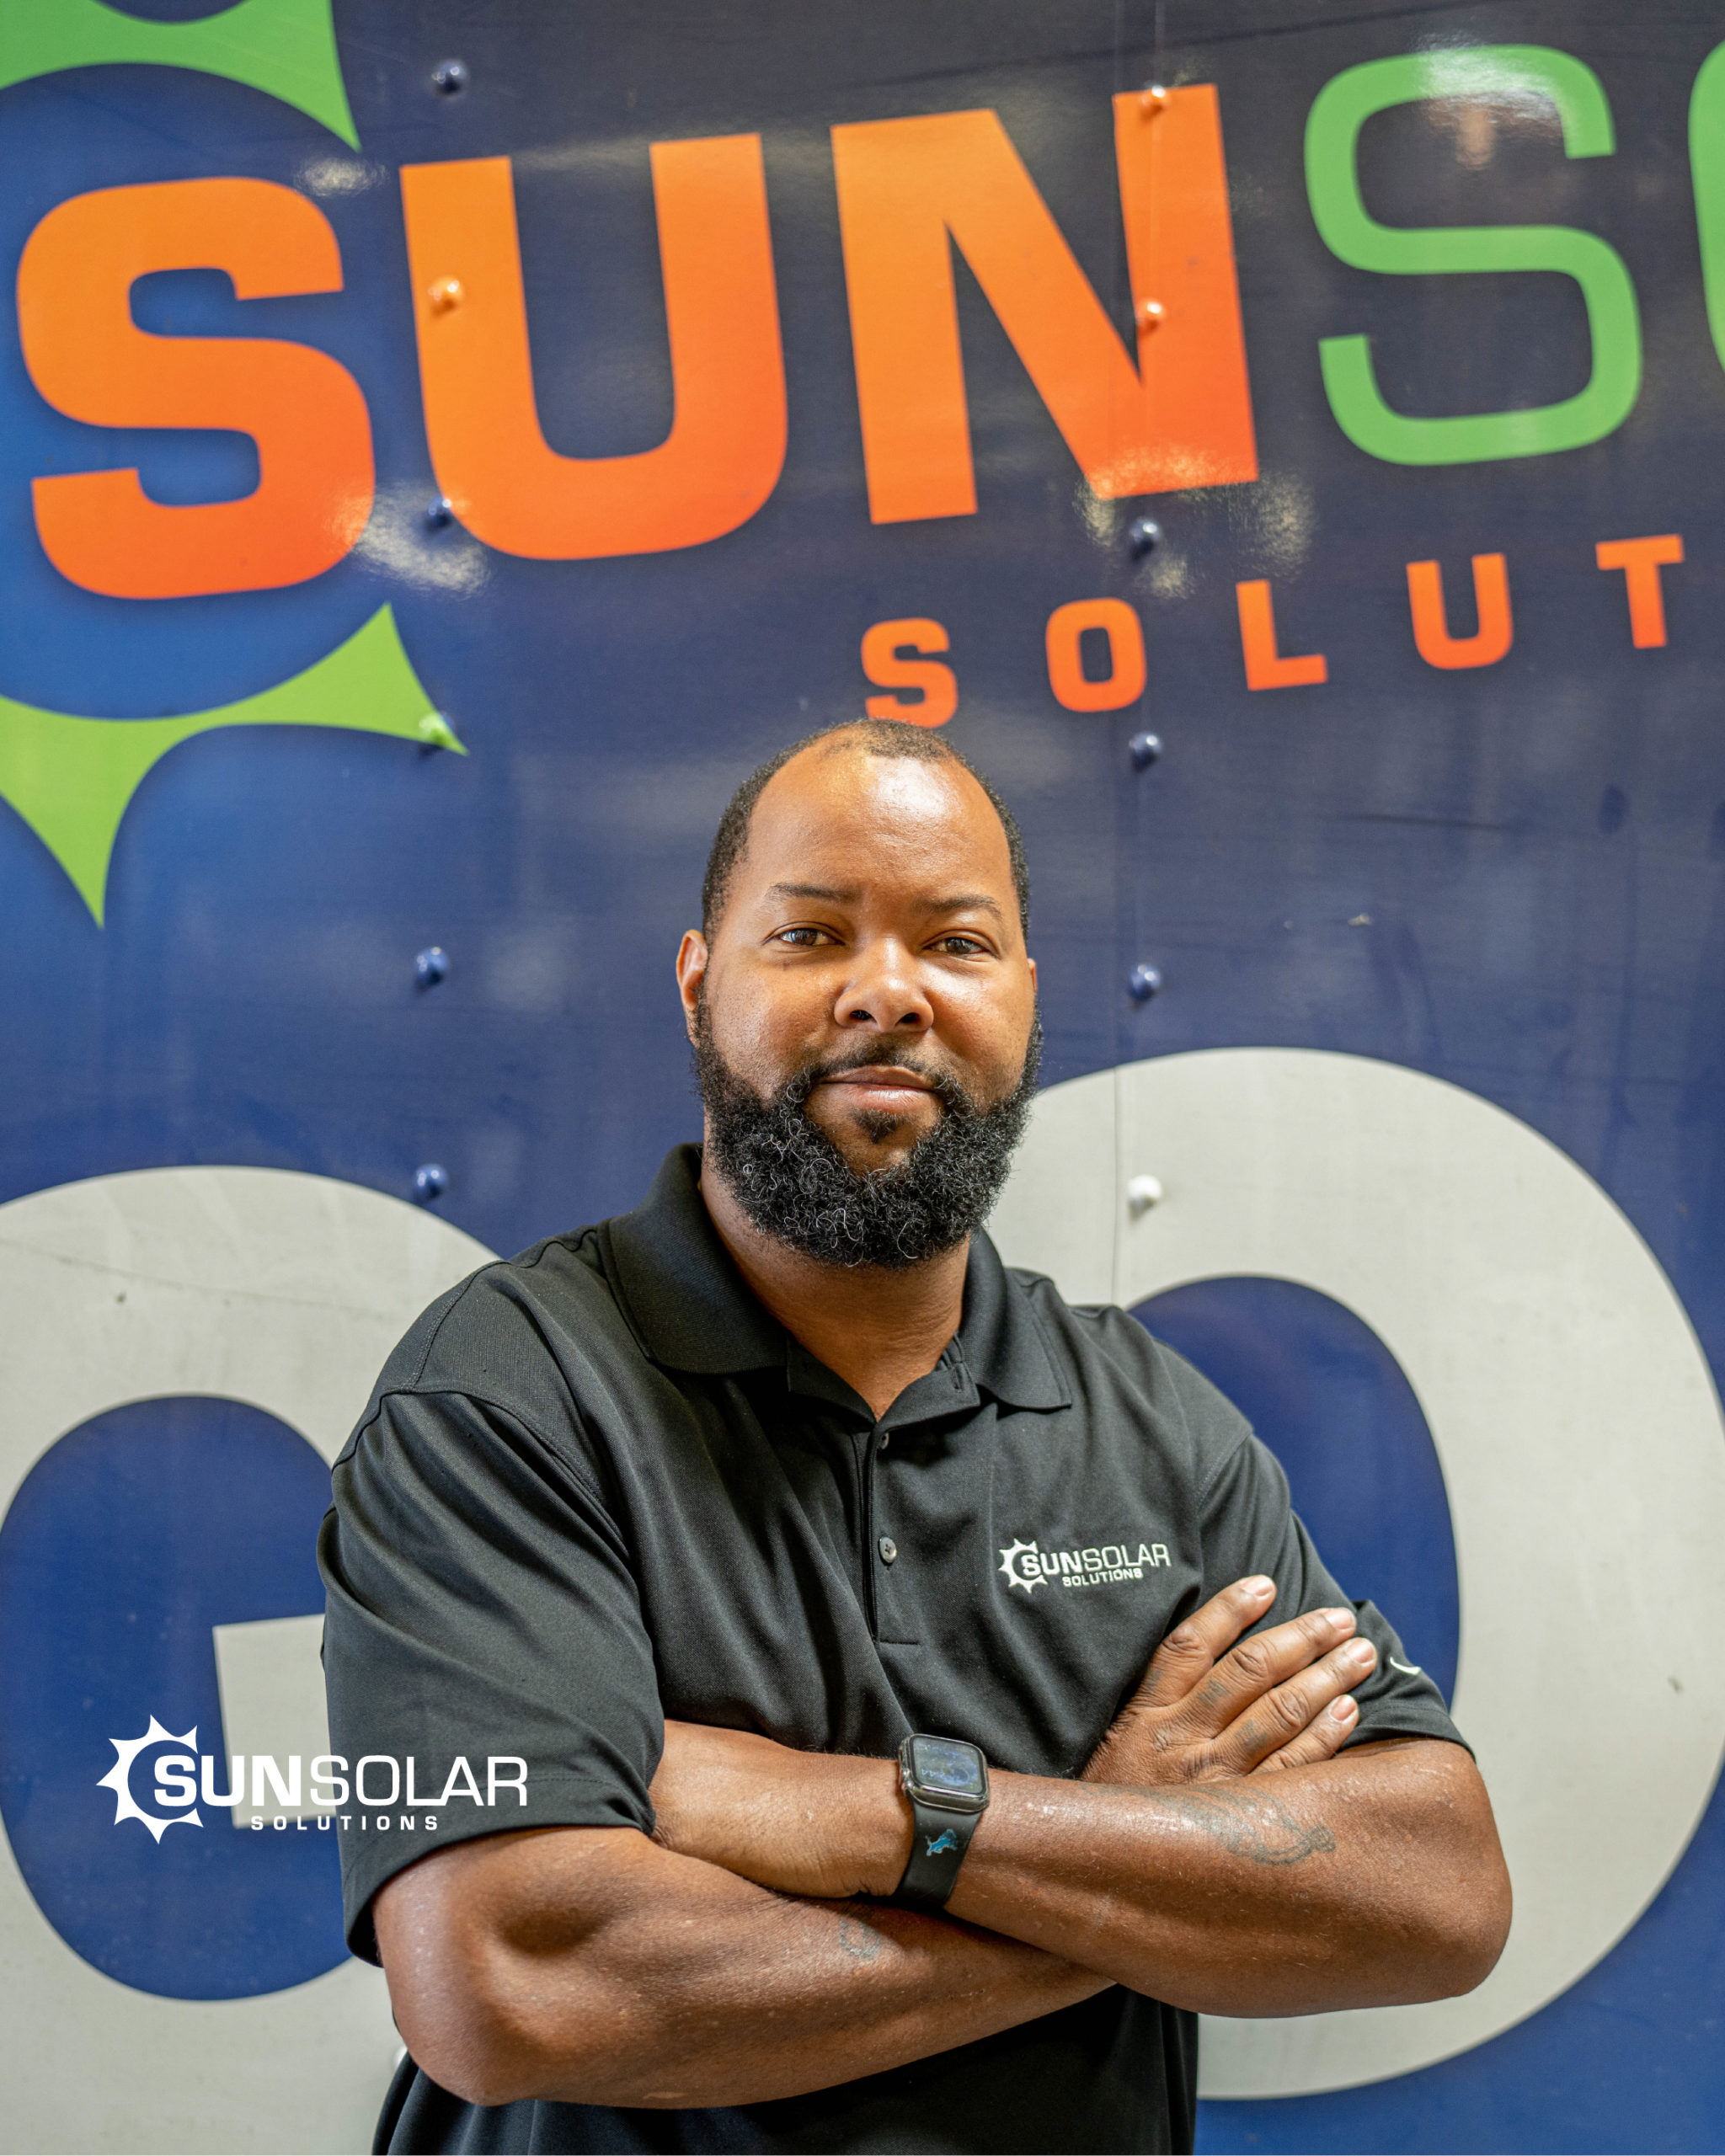 SUNSOLAR SOLUTIONS Employee Posing In Front Of Truck